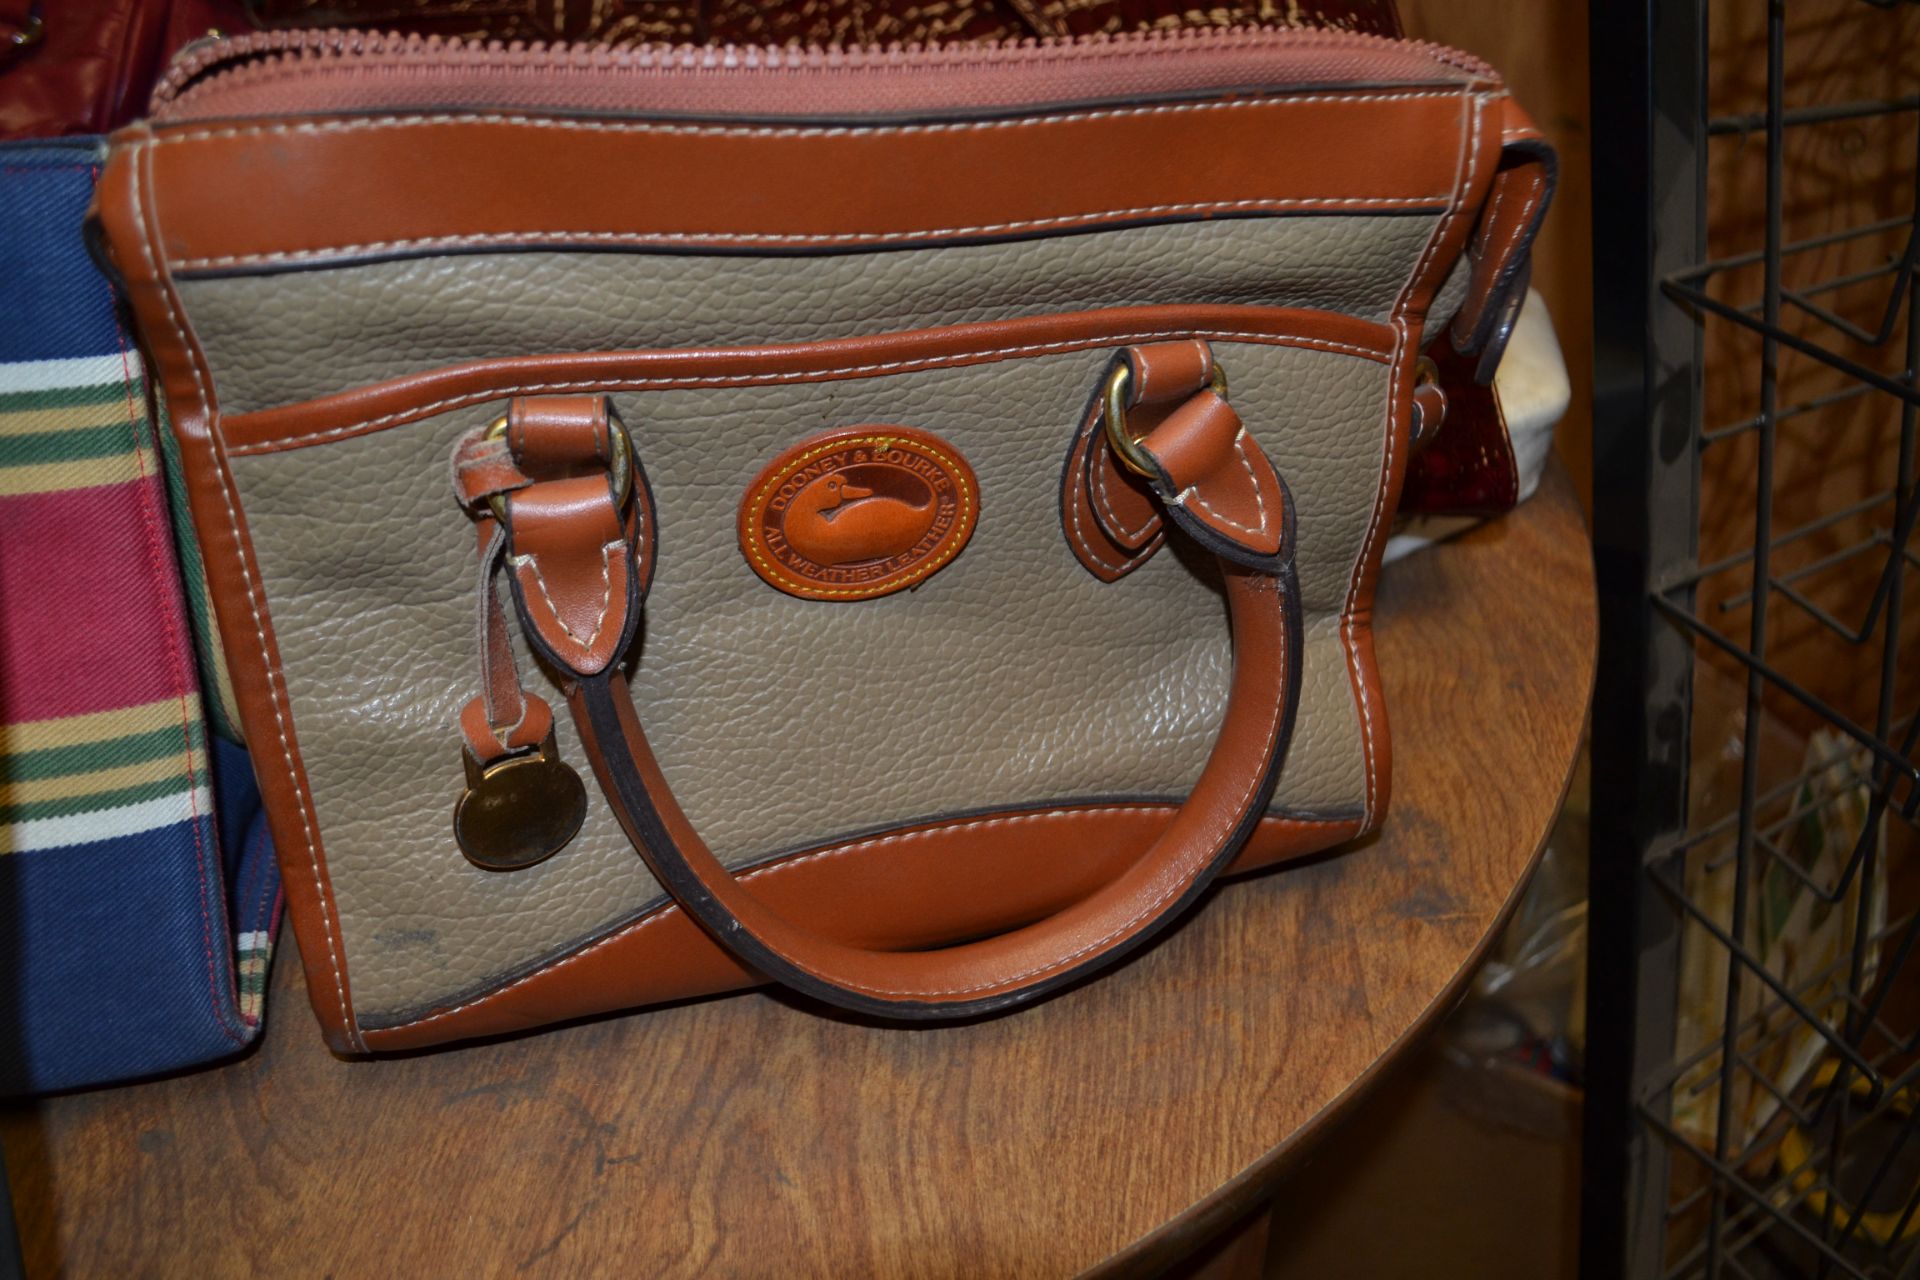 Misc. handbags in mezzanine including Gucci, Kate Spade and Dooney & Bourke - Image 5 of 5